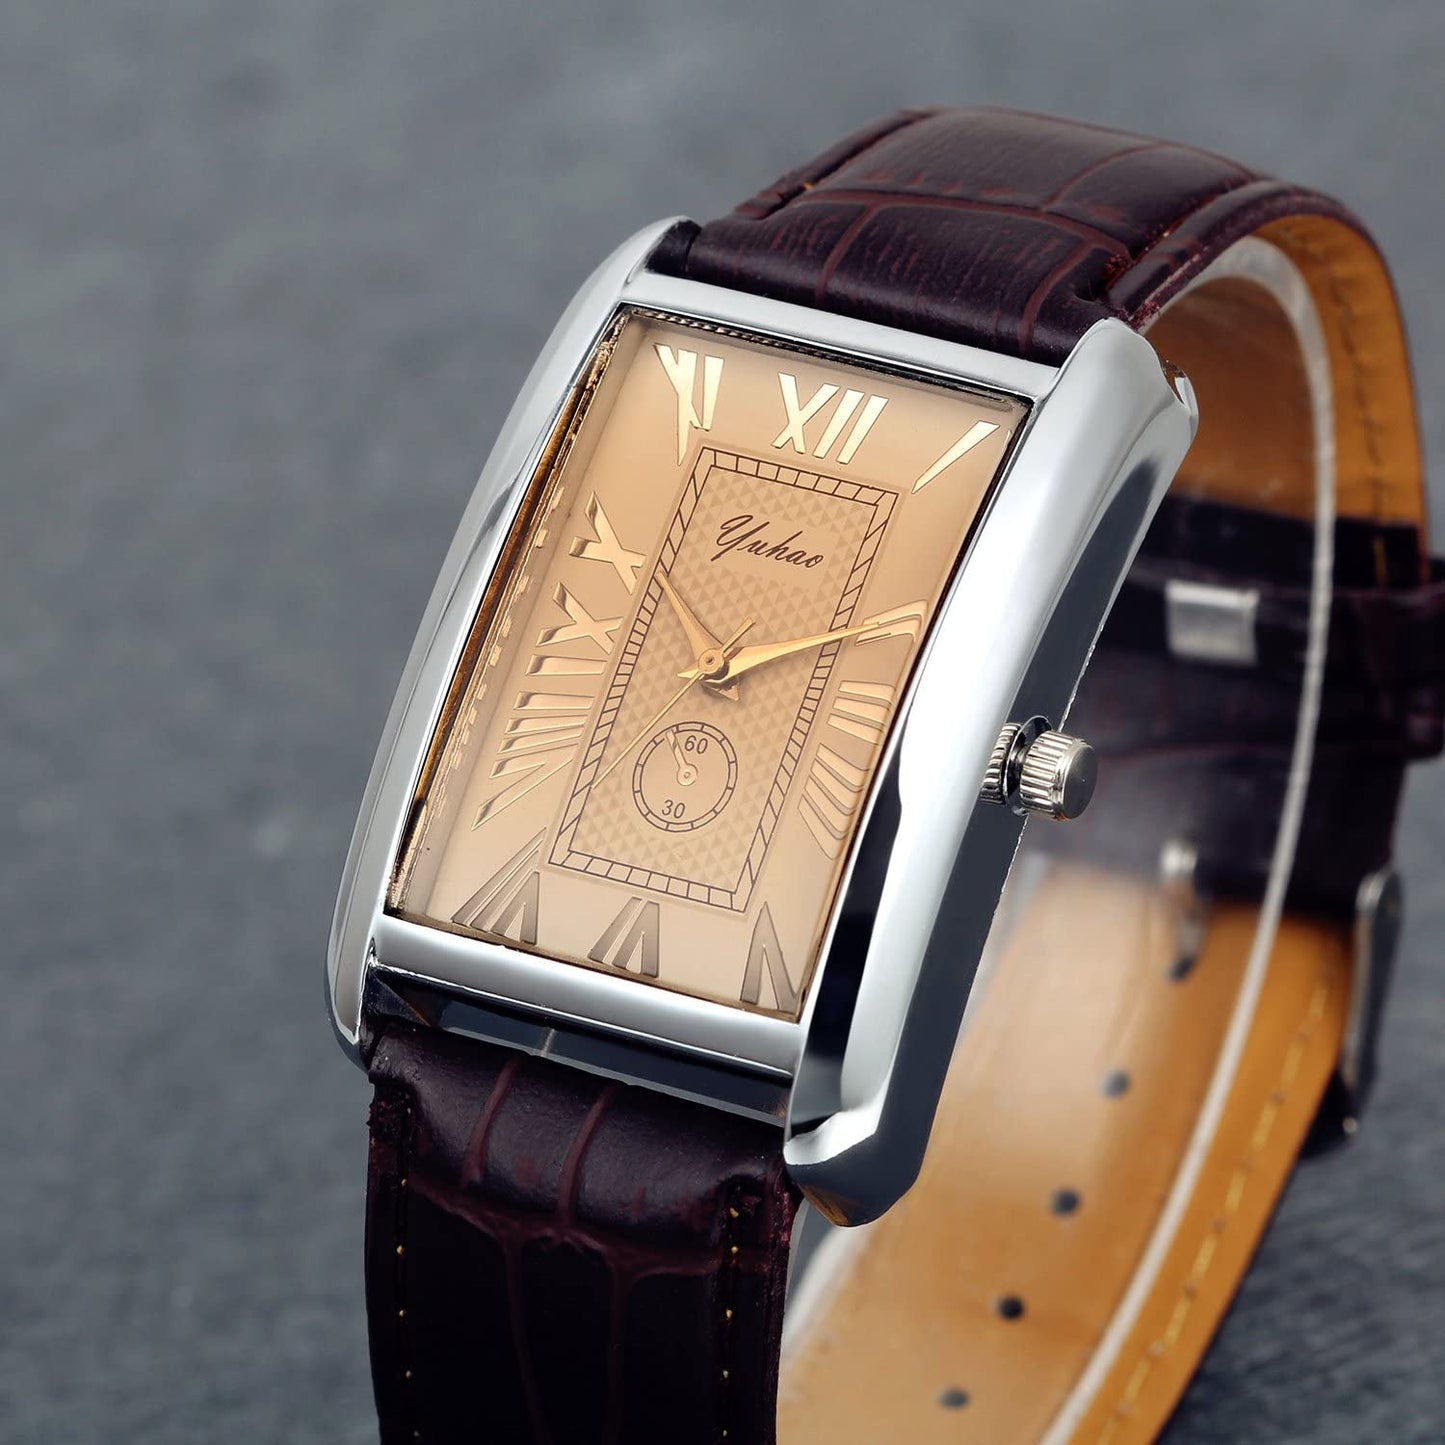 Retro Vintage Square Quartz Analog Watch Silver Tone Case Crocodile Pattern Brown Leather Business Casual Dress Wrist Watch for Christmas